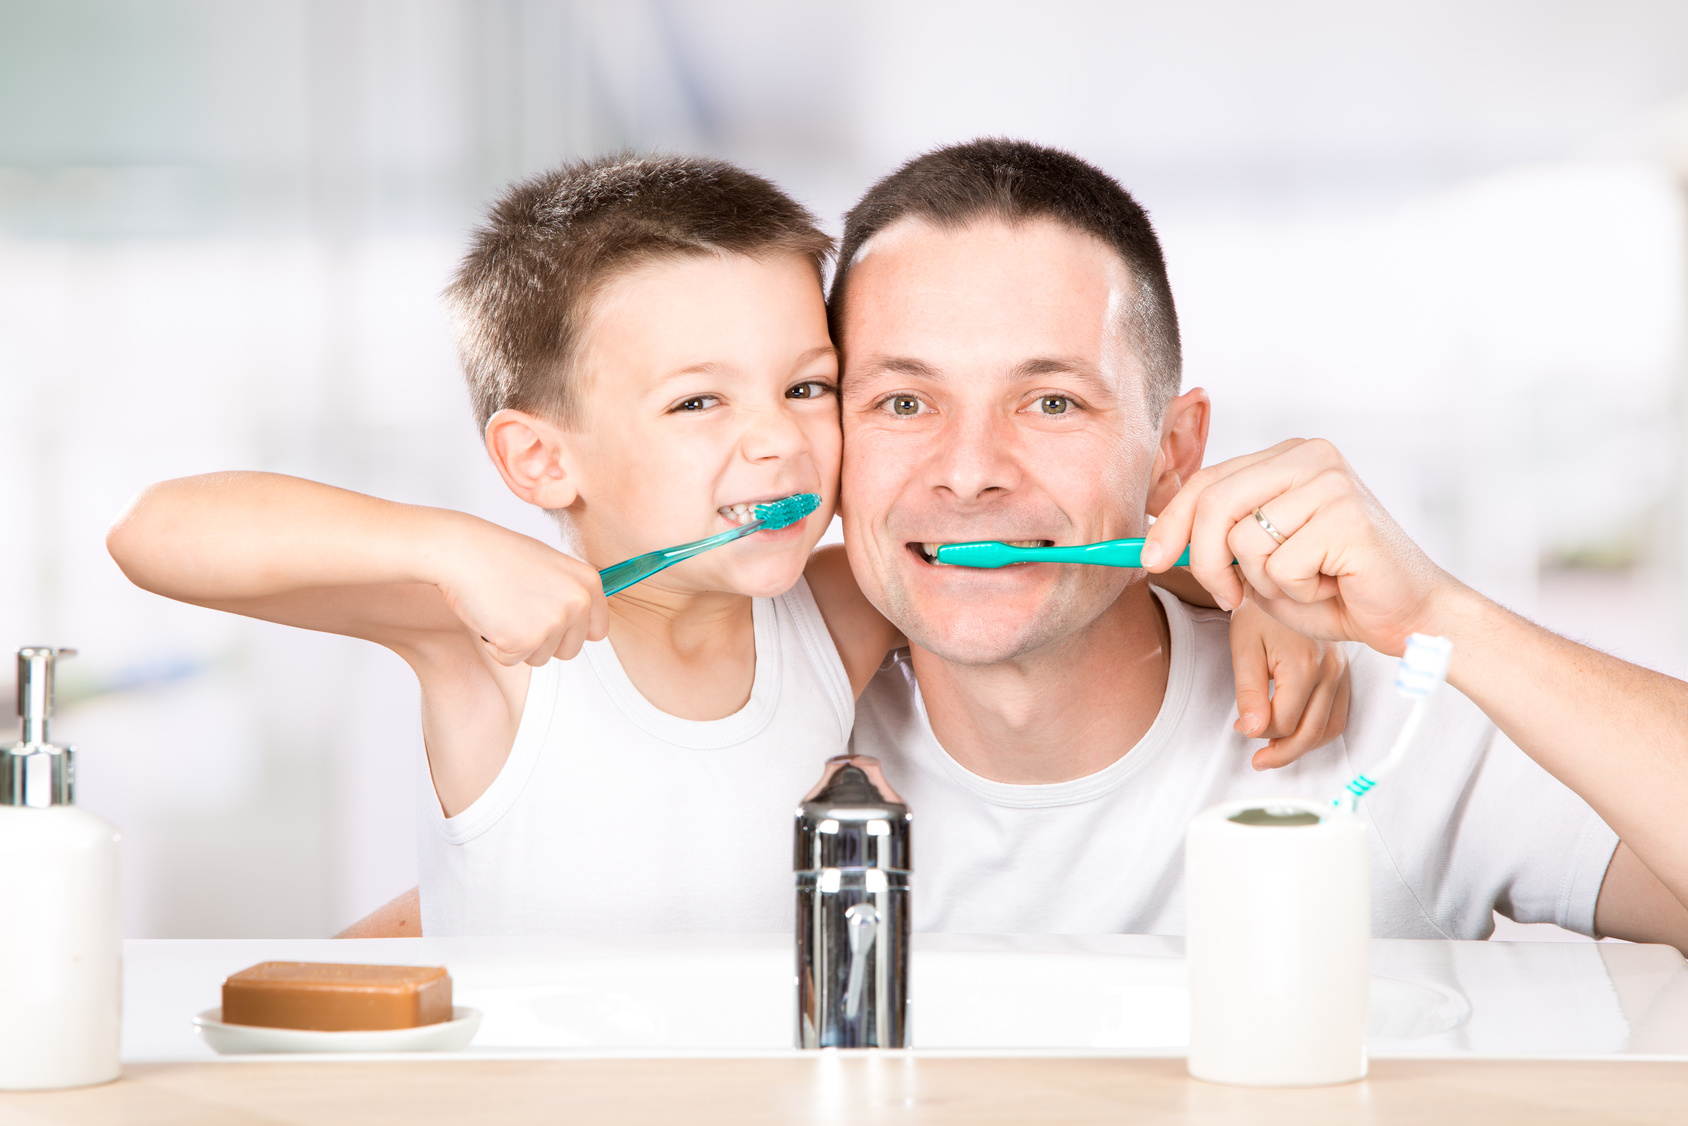 5 Dental Hygiene Habits to Show Your Young Children